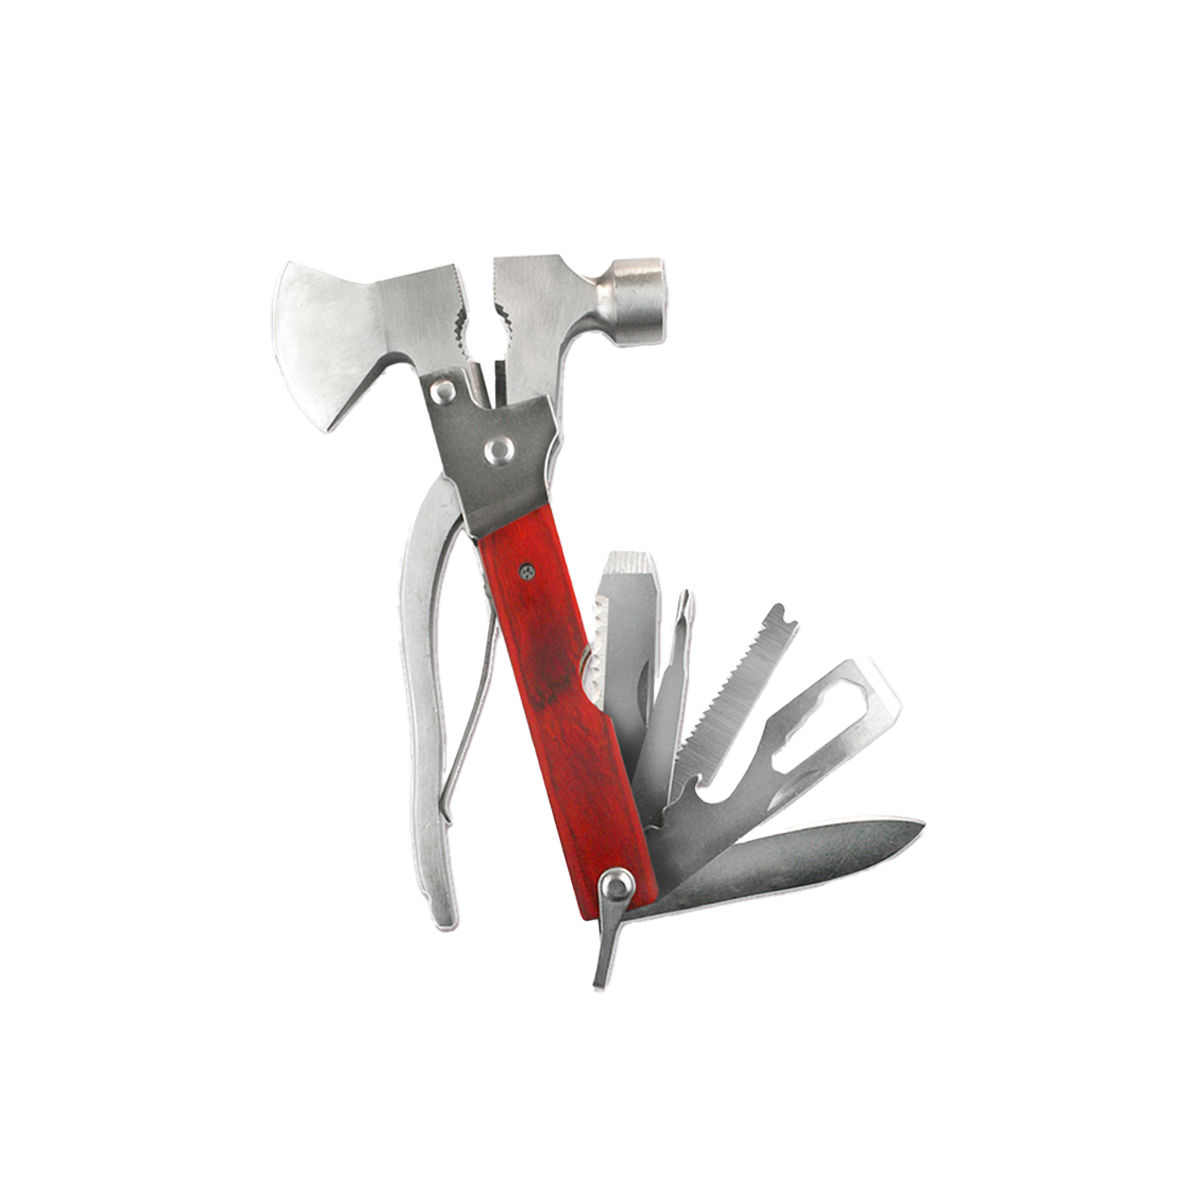 Axe Multi-Tool with various implements such as a hammer, pliers, knife, and saw blades, all made of stainless steel with a red handle, isolated on a white background.